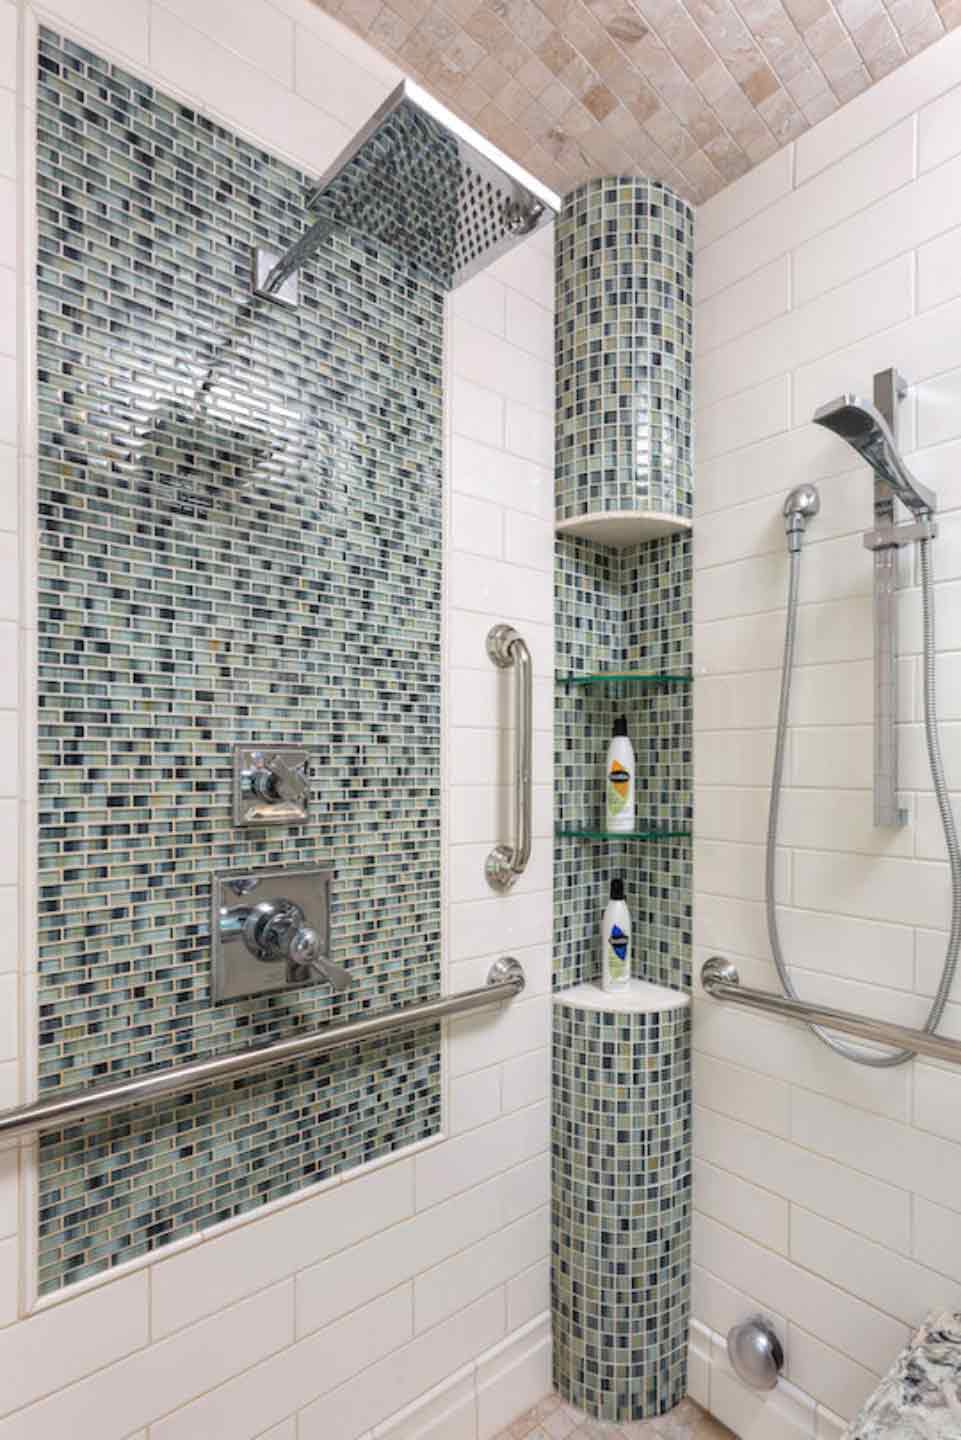 Mosaic tiled bathroom shower with corner shelving and ADA accessible.